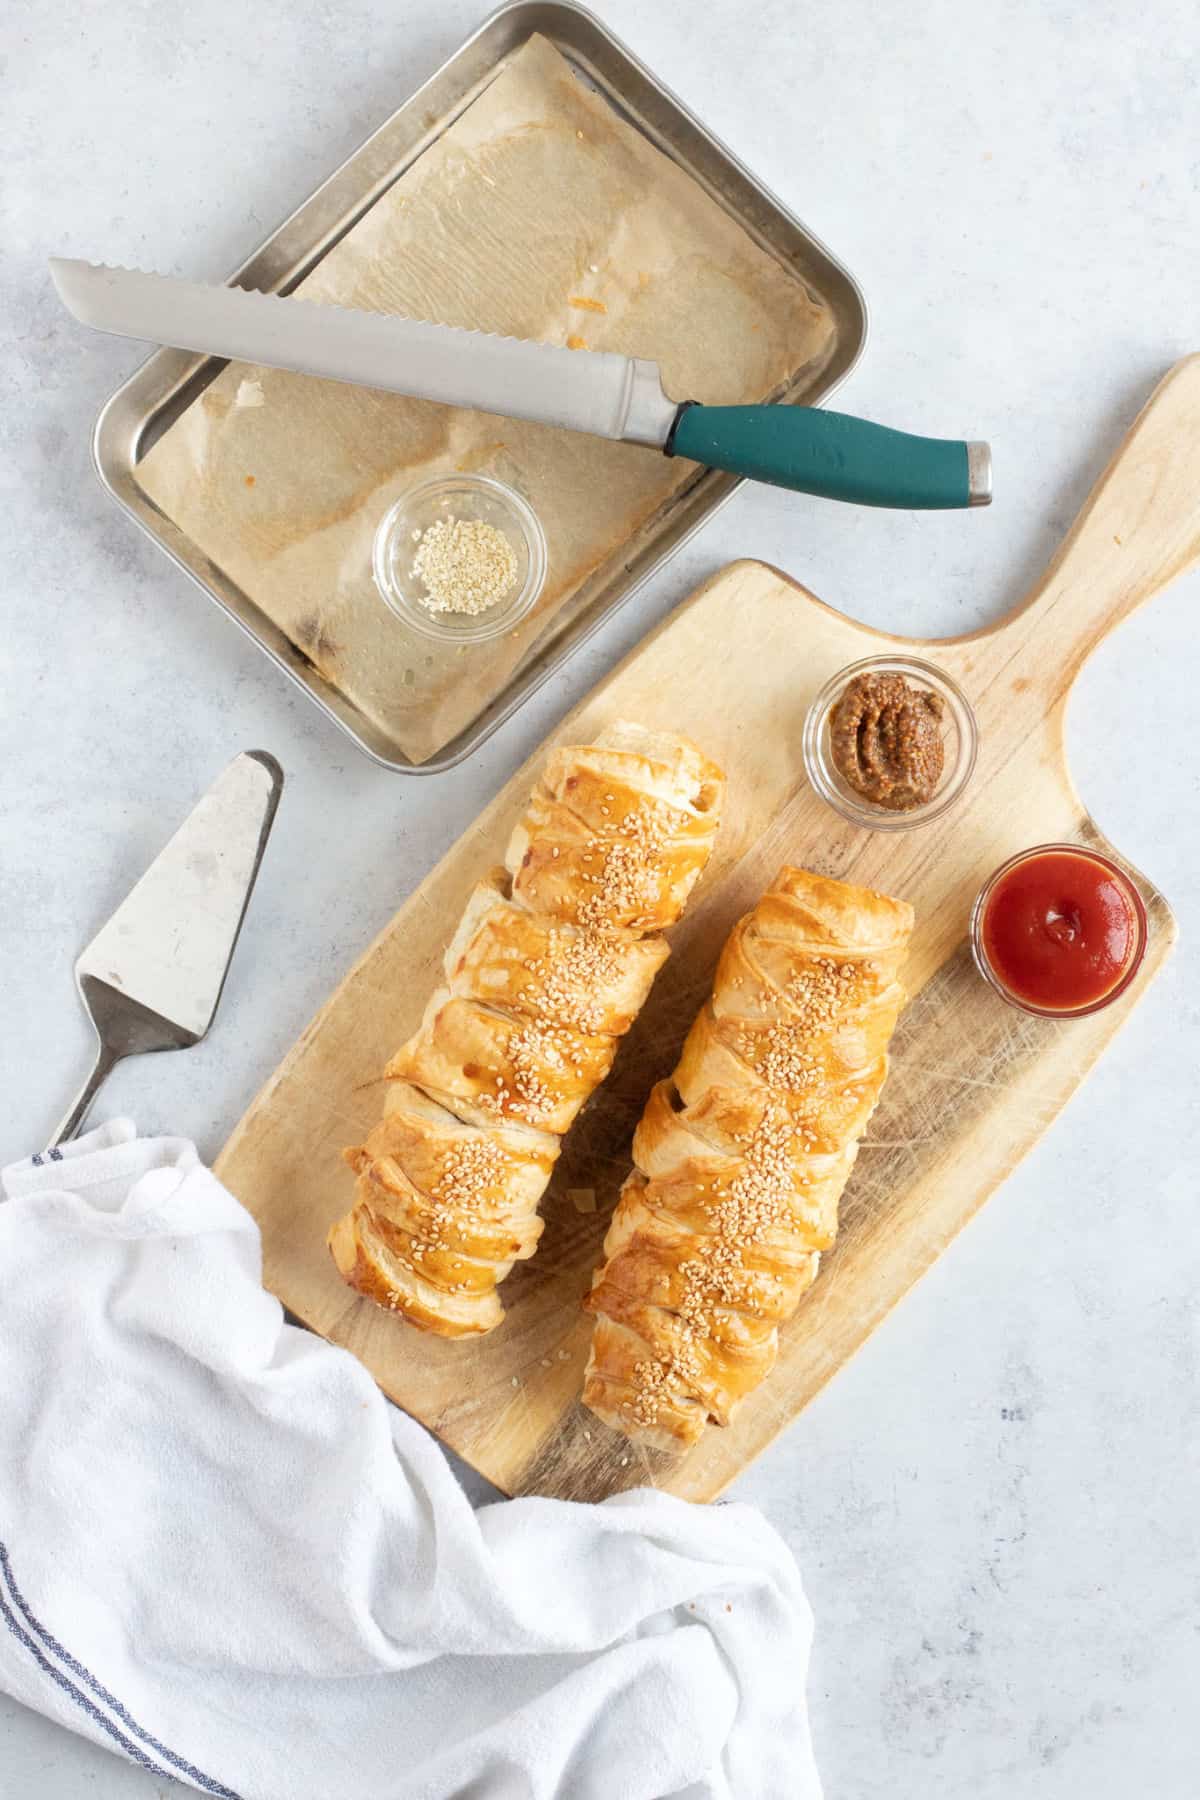 Sausage plaits on a wooden board.